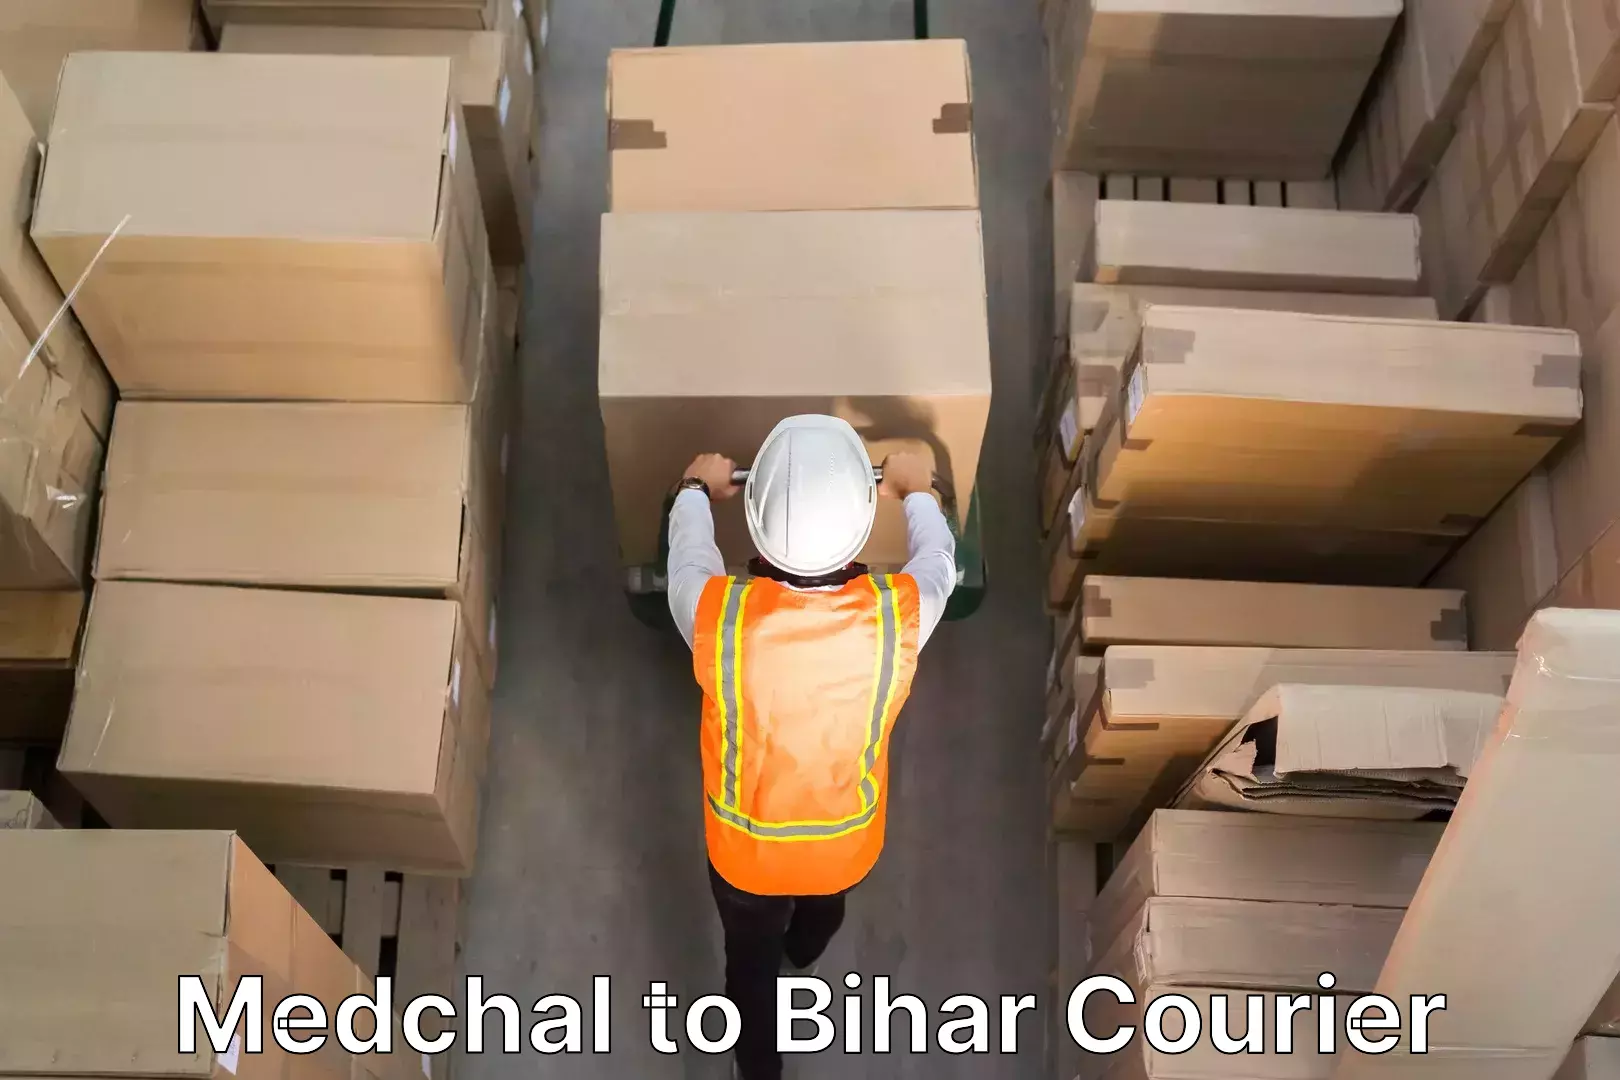 Trusted relocation experts Medchal to Bihar